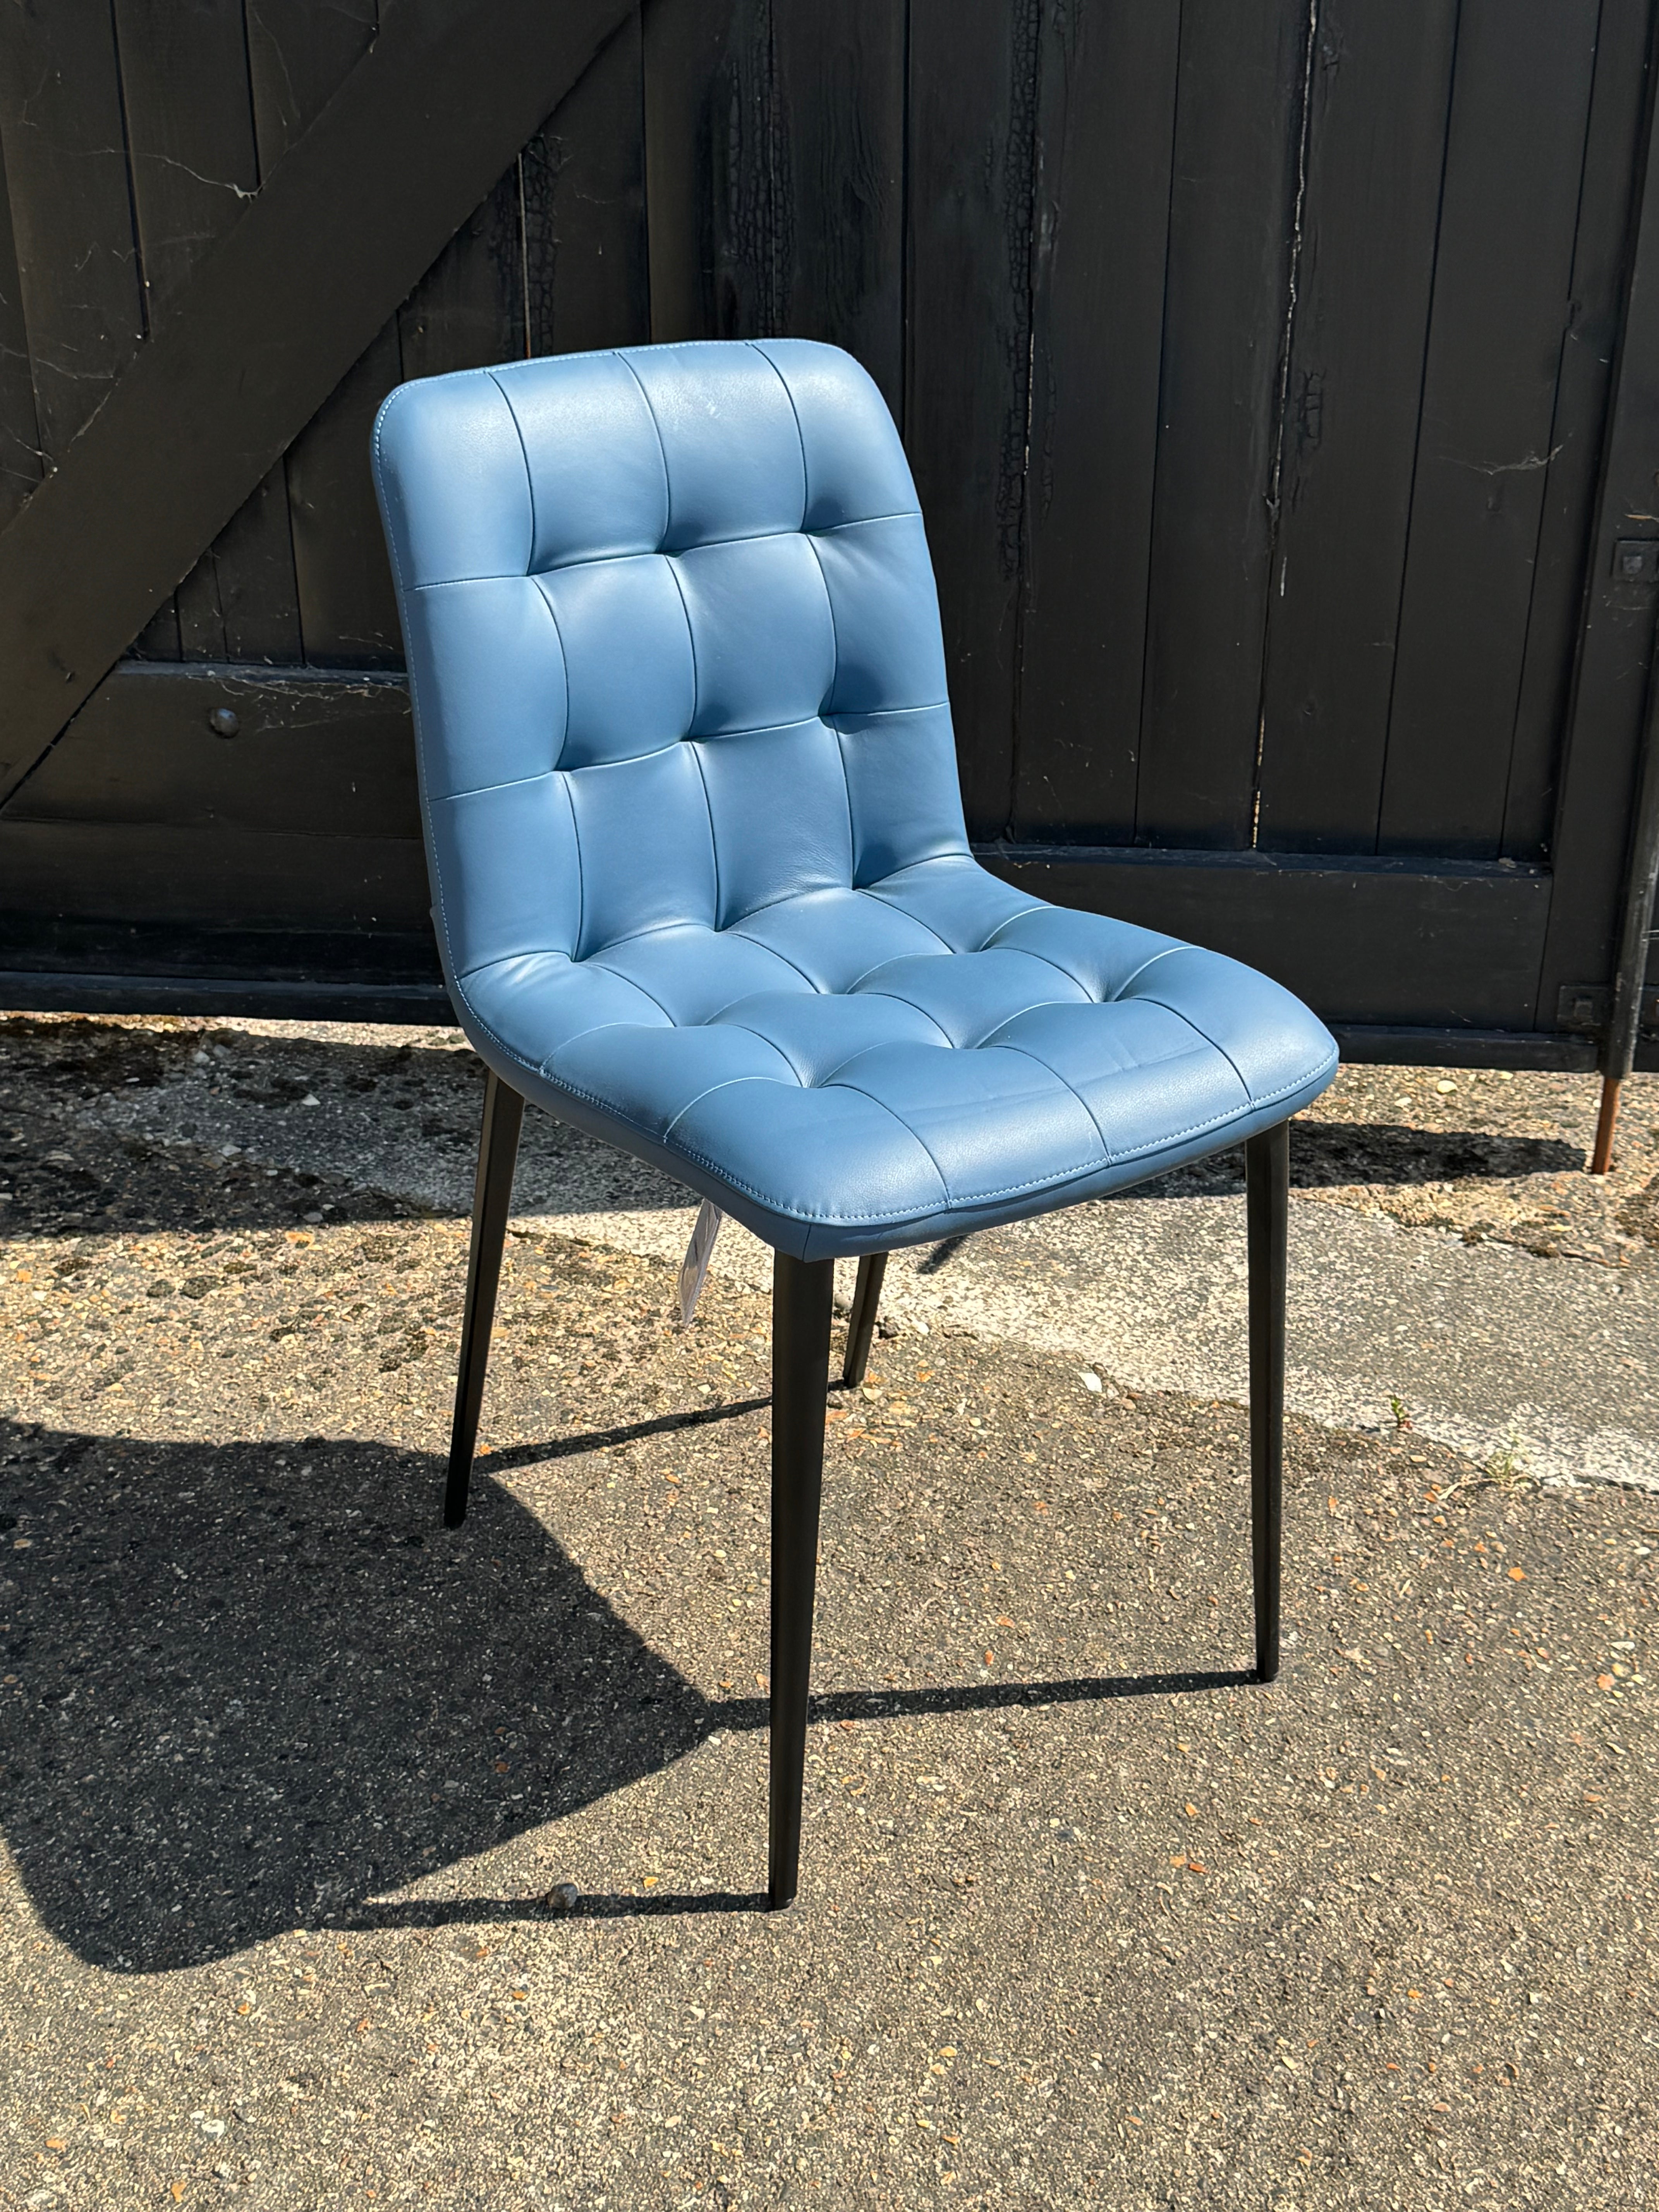 Ex-Display *50%* Discount - 6 X Bontempi Kuga Slim Dining Chairs - Premium Nappa Leather Air Force Blue With Natural Silver Legs